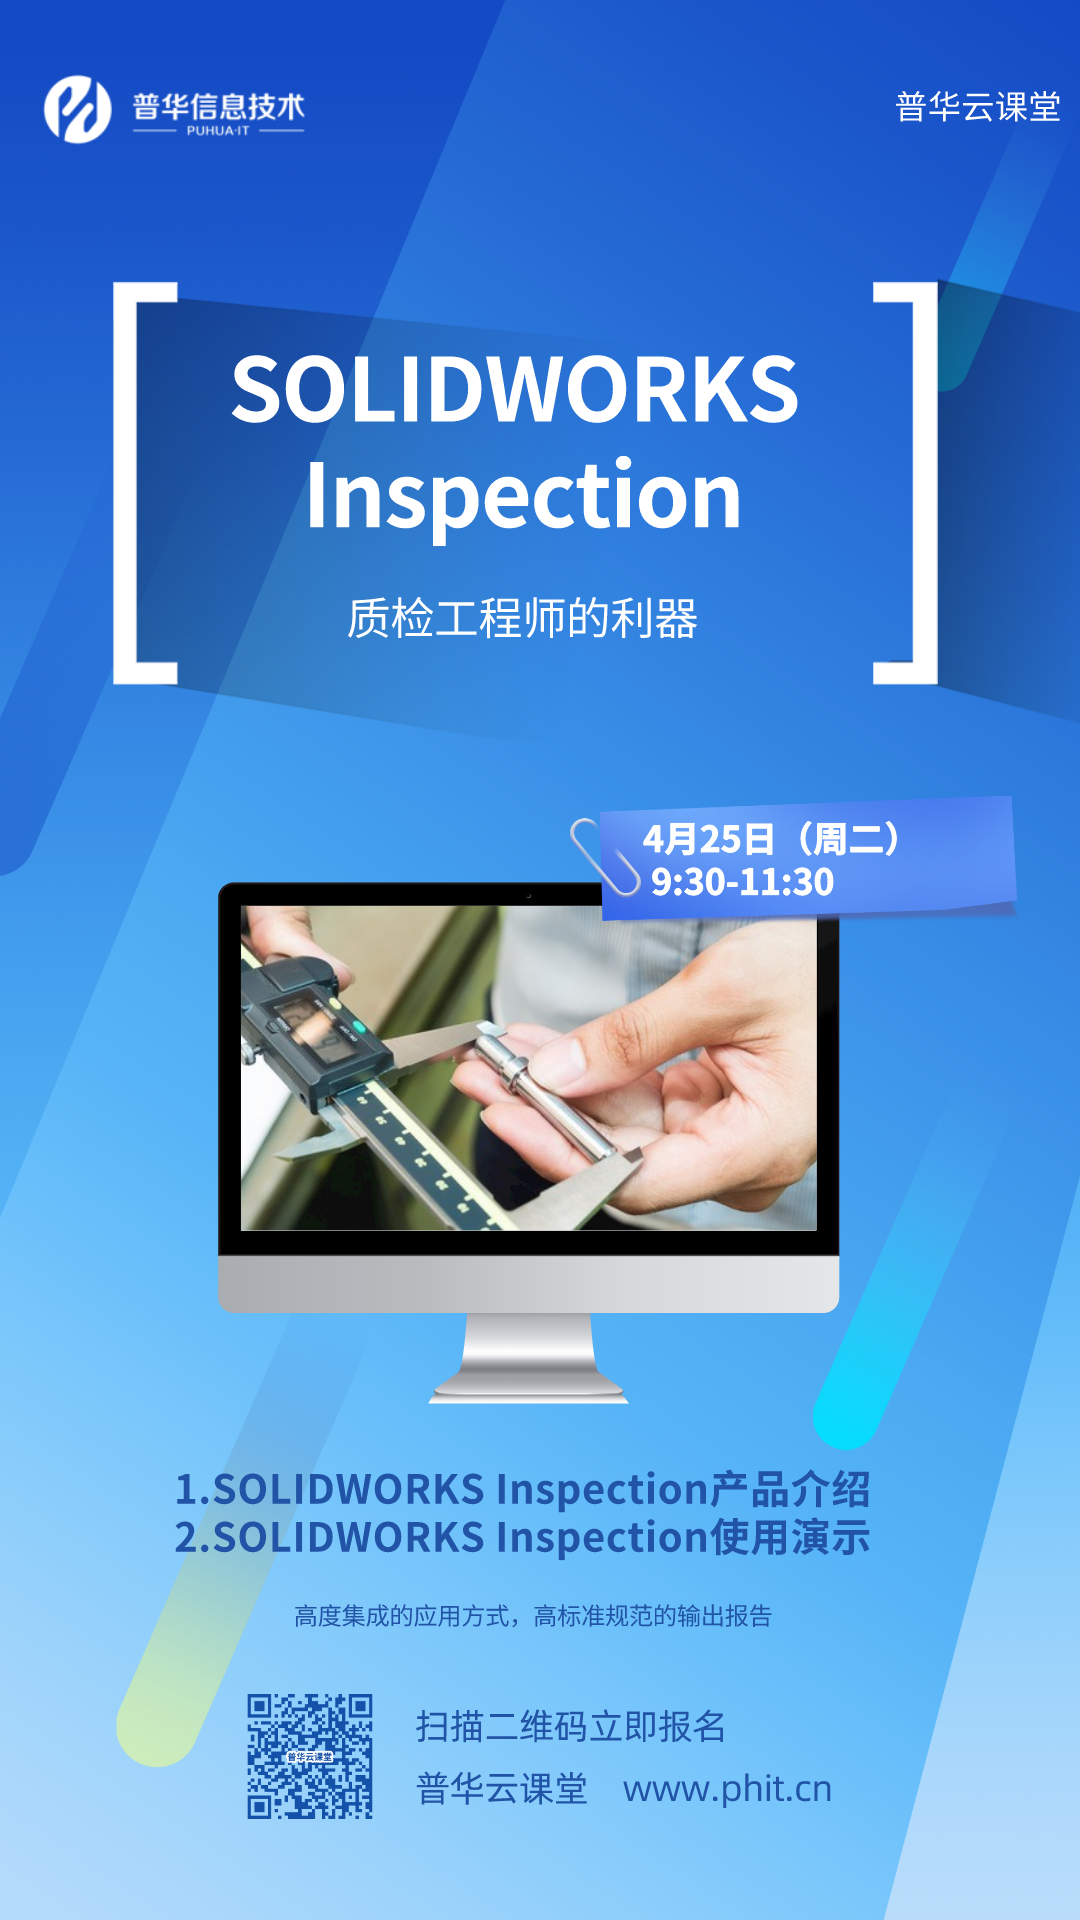 SOLIDWORKS Inspection产品介绍